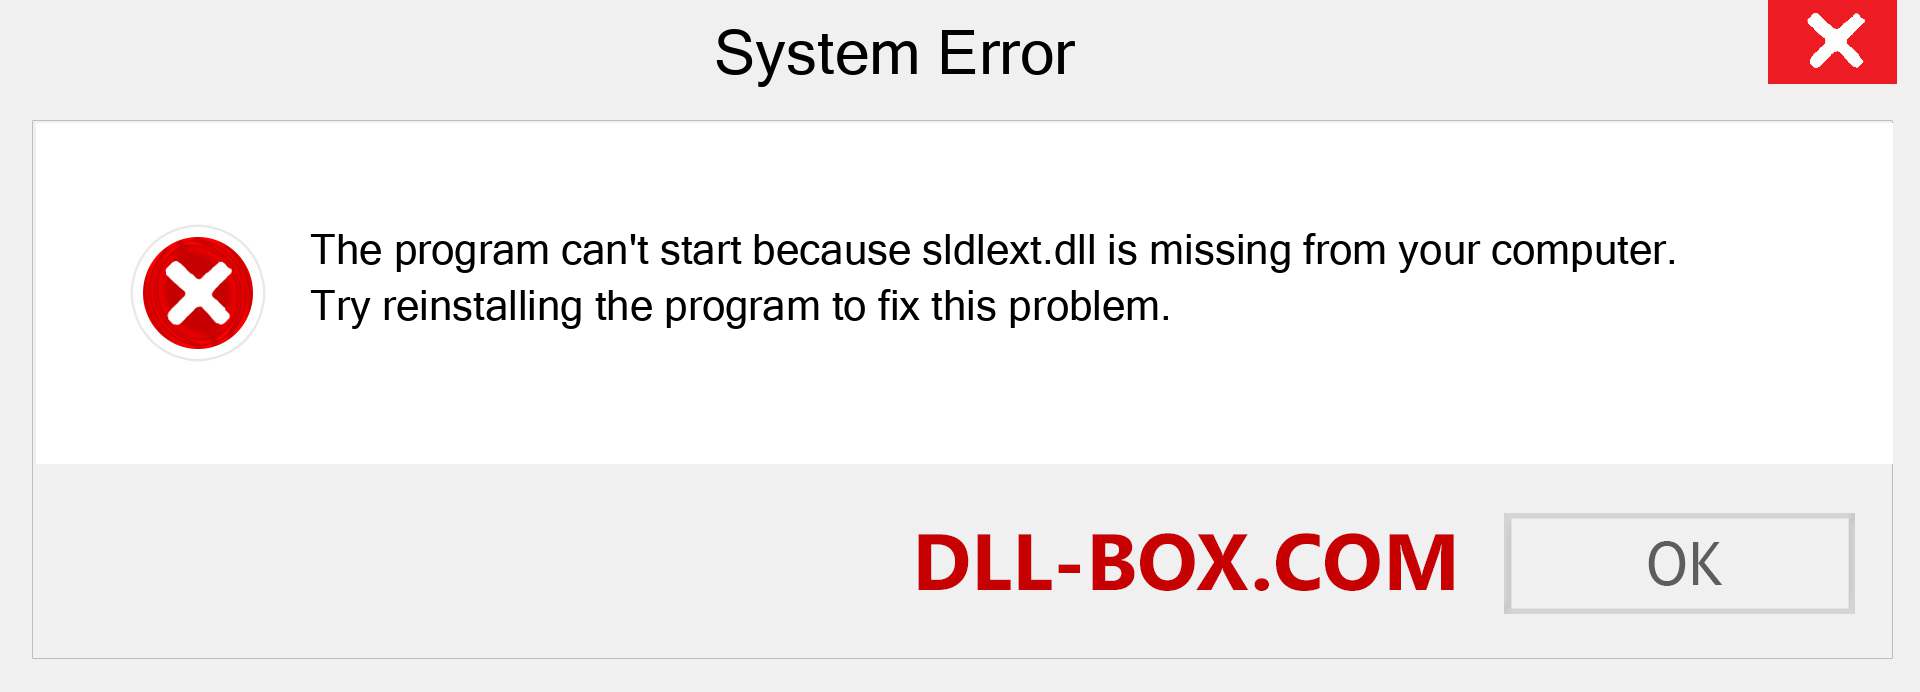  sldlext.dll file is missing?. Download for Windows 7, 8, 10 - Fix  sldlext dll Missing Error on Windows, photos, images